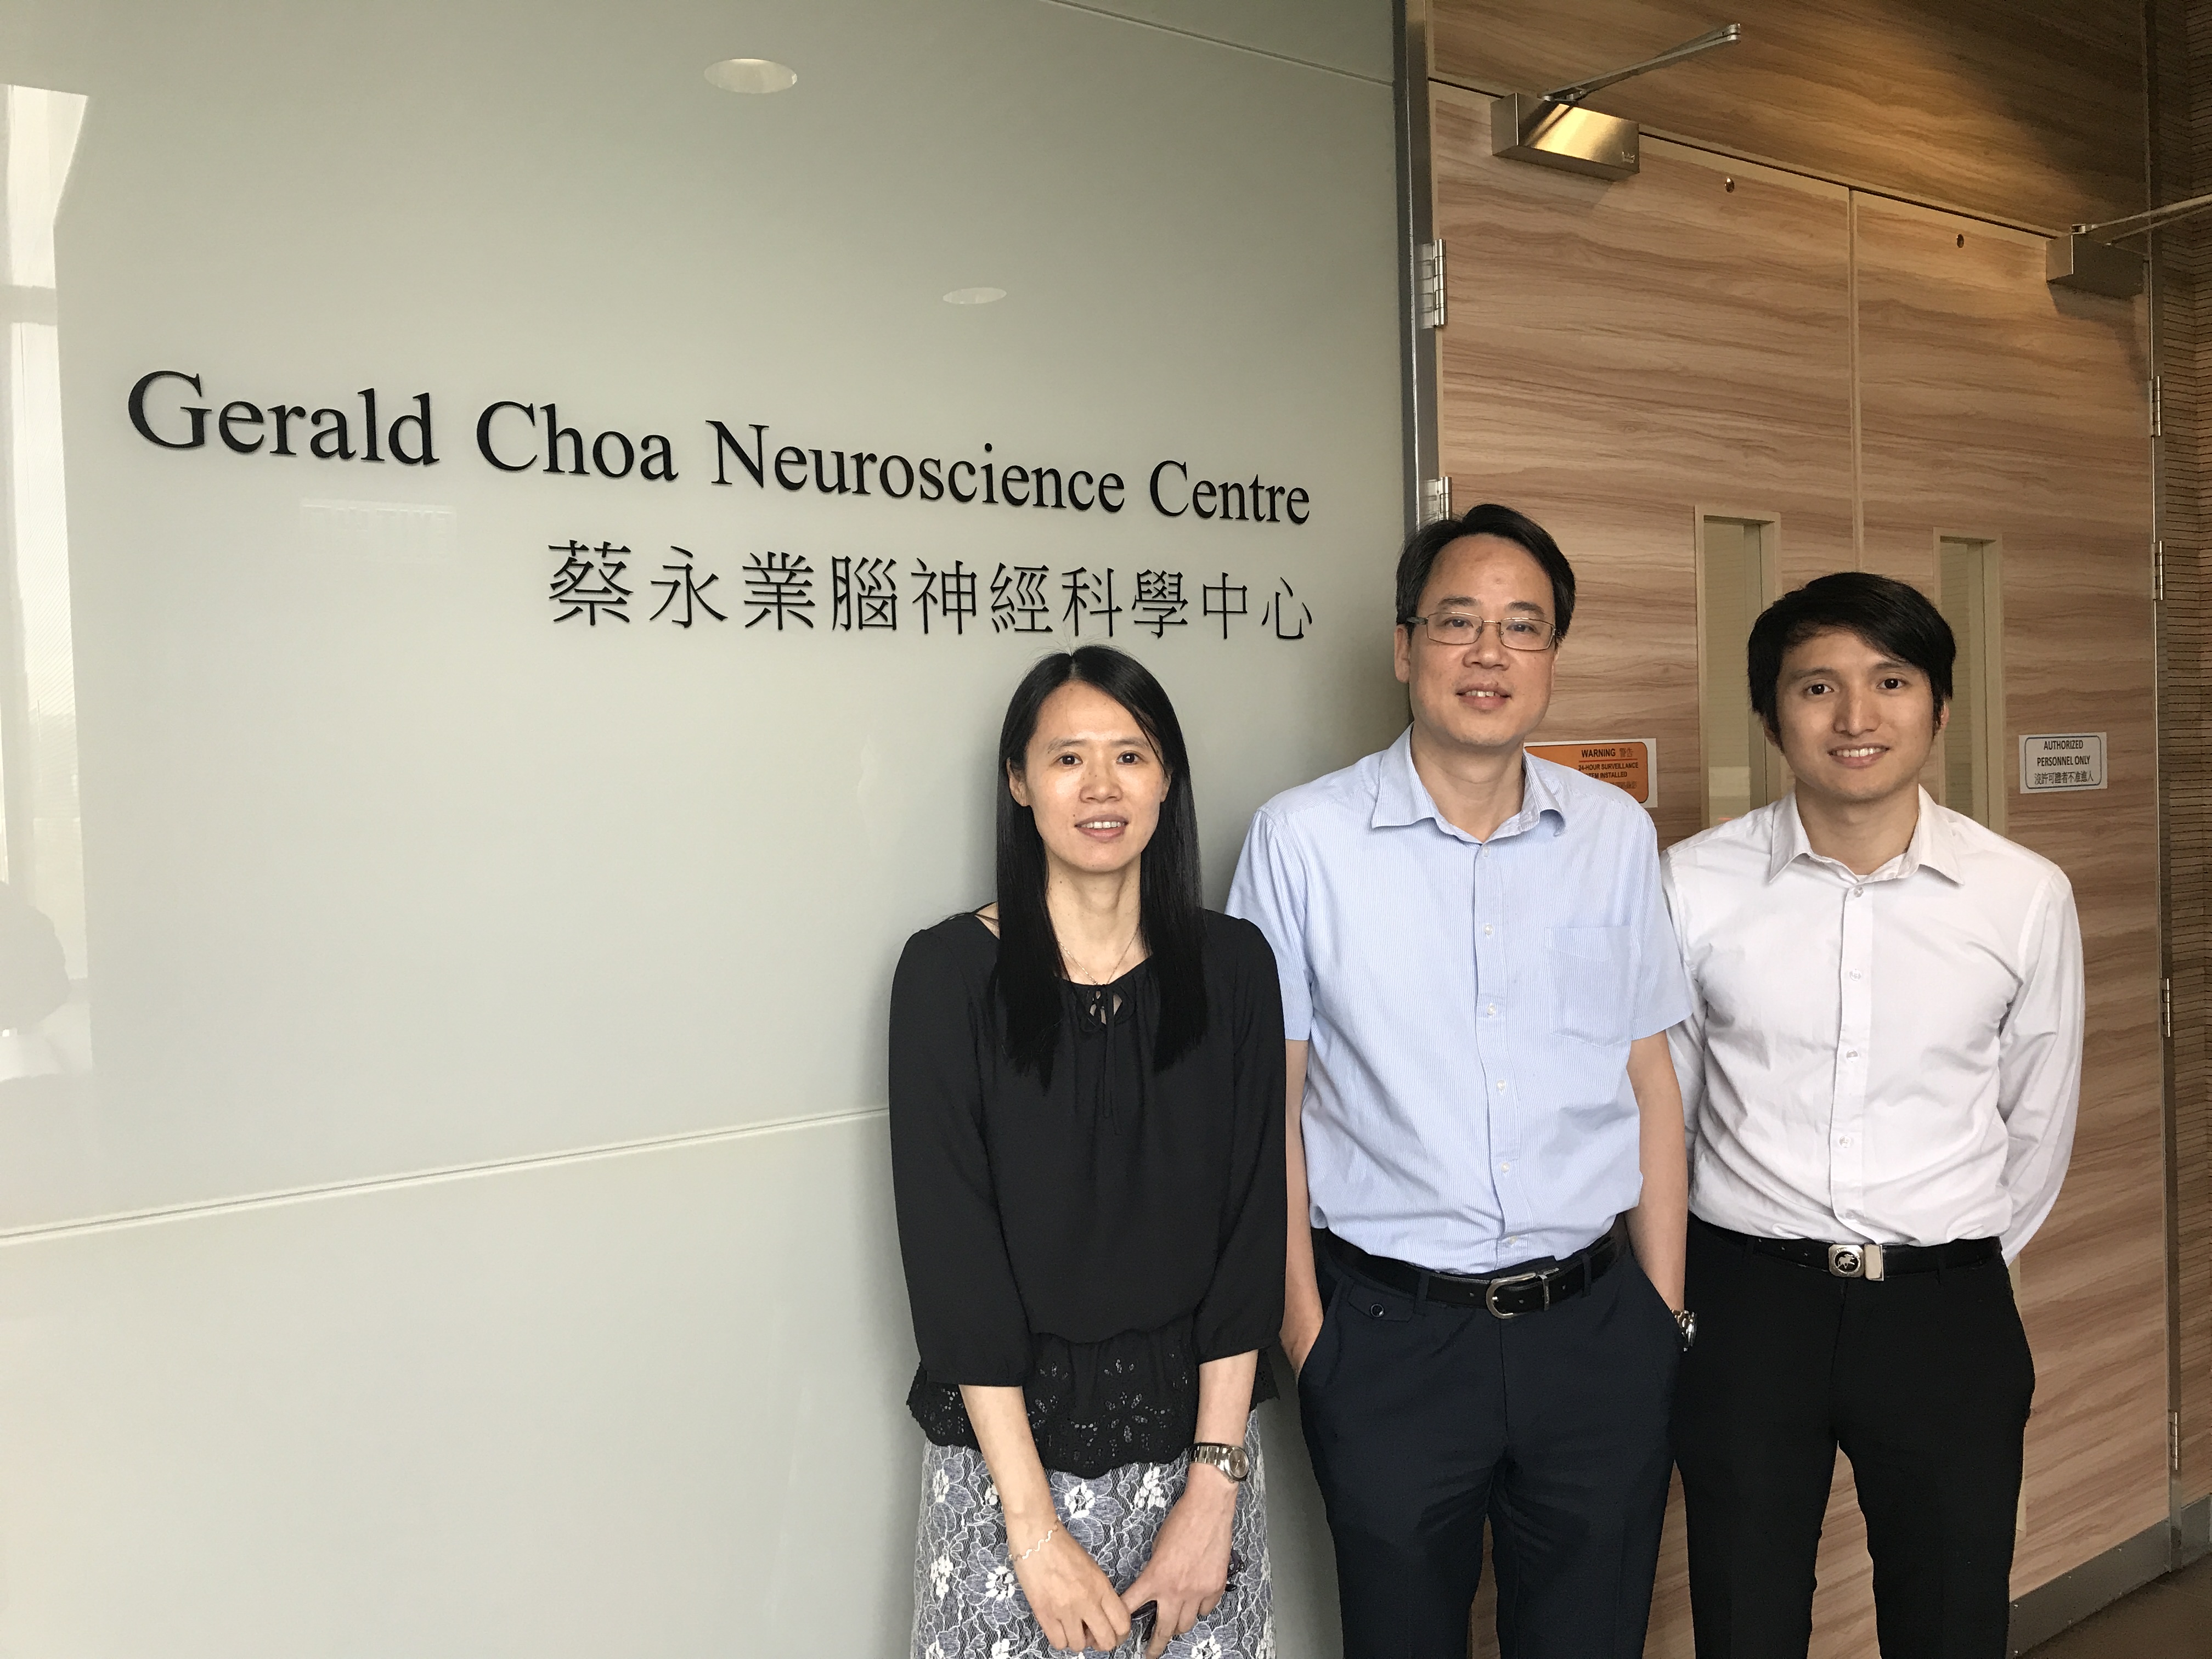 A recent study conducted by the Gerald Choa Neuroscience Centre of CUHK unveils the intricate processes of motor memory formation taking place in the brain. (From left) Associate Professor Ya KE and Professor Wing Ho YUNG from the School of Biomedical Sciences, and Dr. Owen KO, Clinical Lecturer, Department of Medicine and Therapeutics, of the Faculty of Medicine at CUHK.